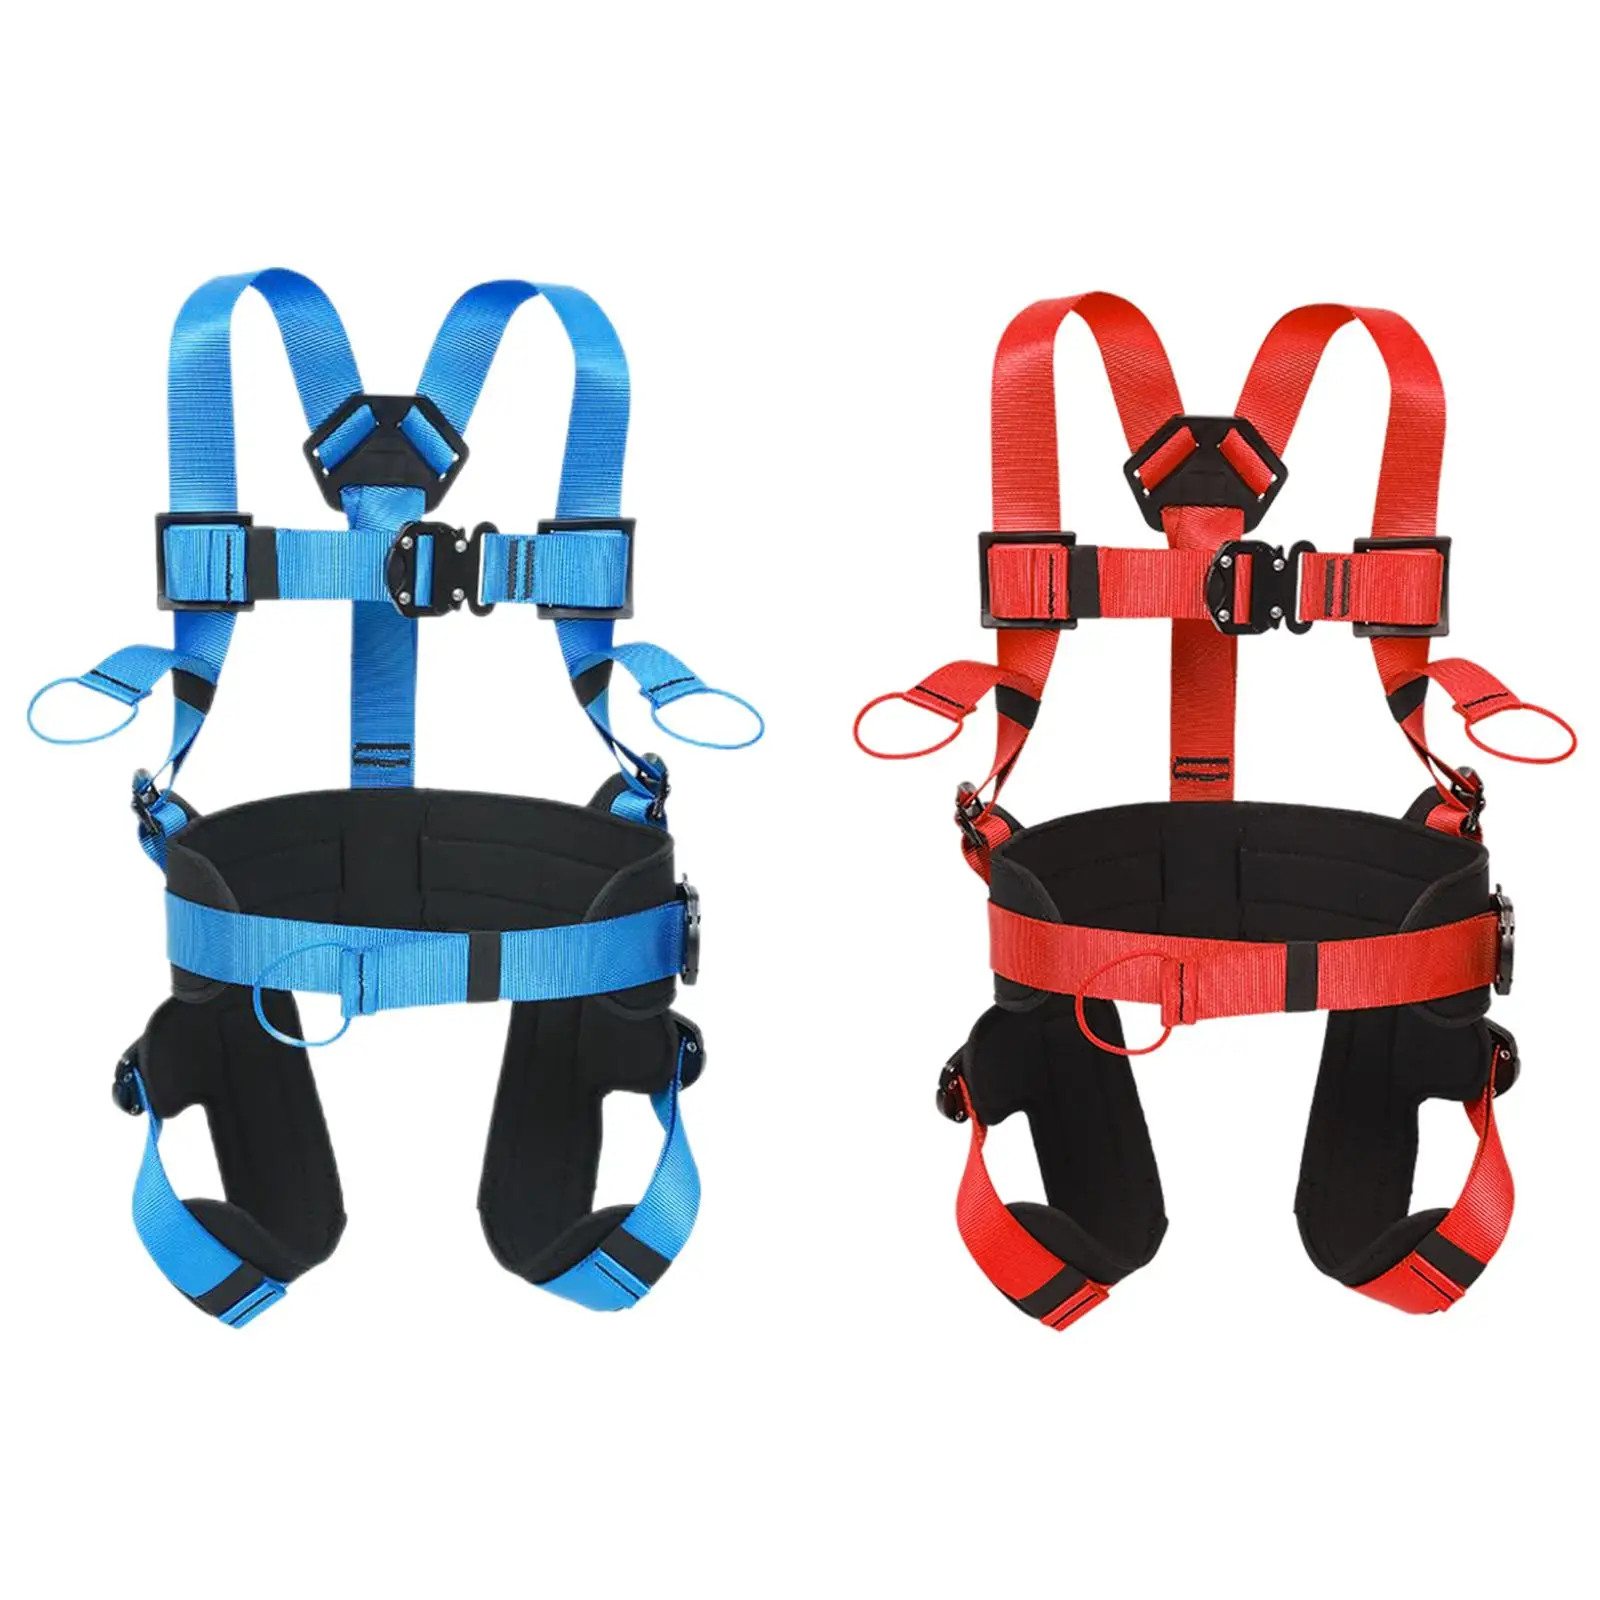 

Kids Child Bungee Trampoline Harness Safety Sit Seat Belt for Park Jumping